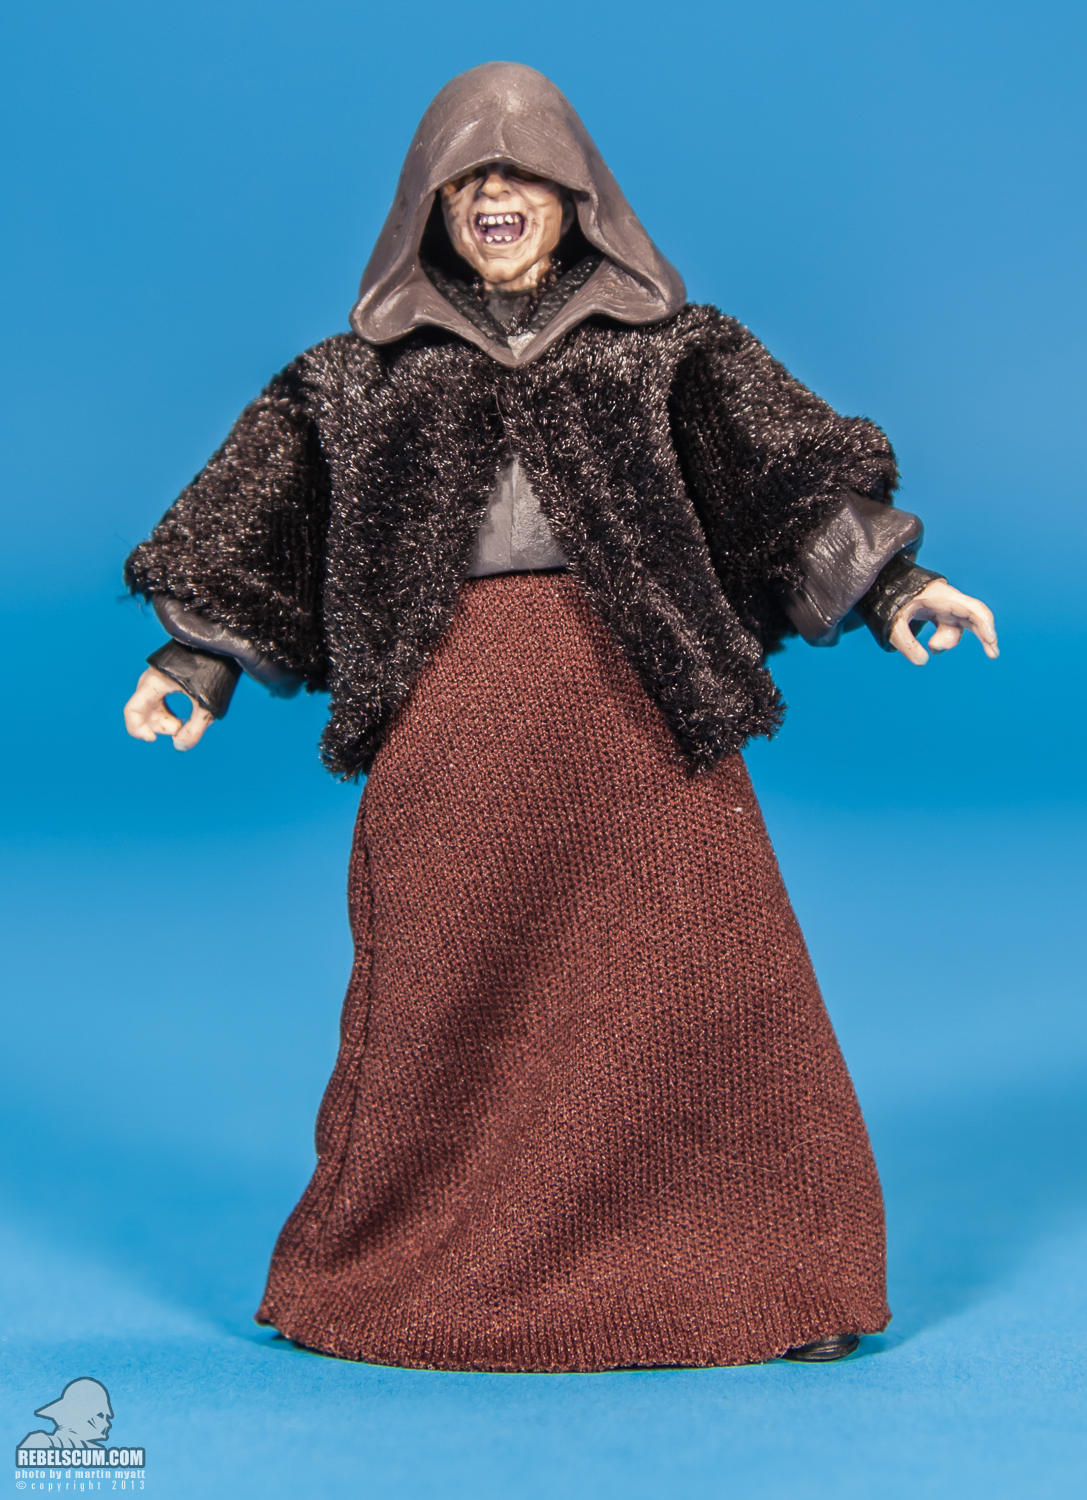 Darth_Sidious_Vintage_Collection_TVC_VC12-01.jpg